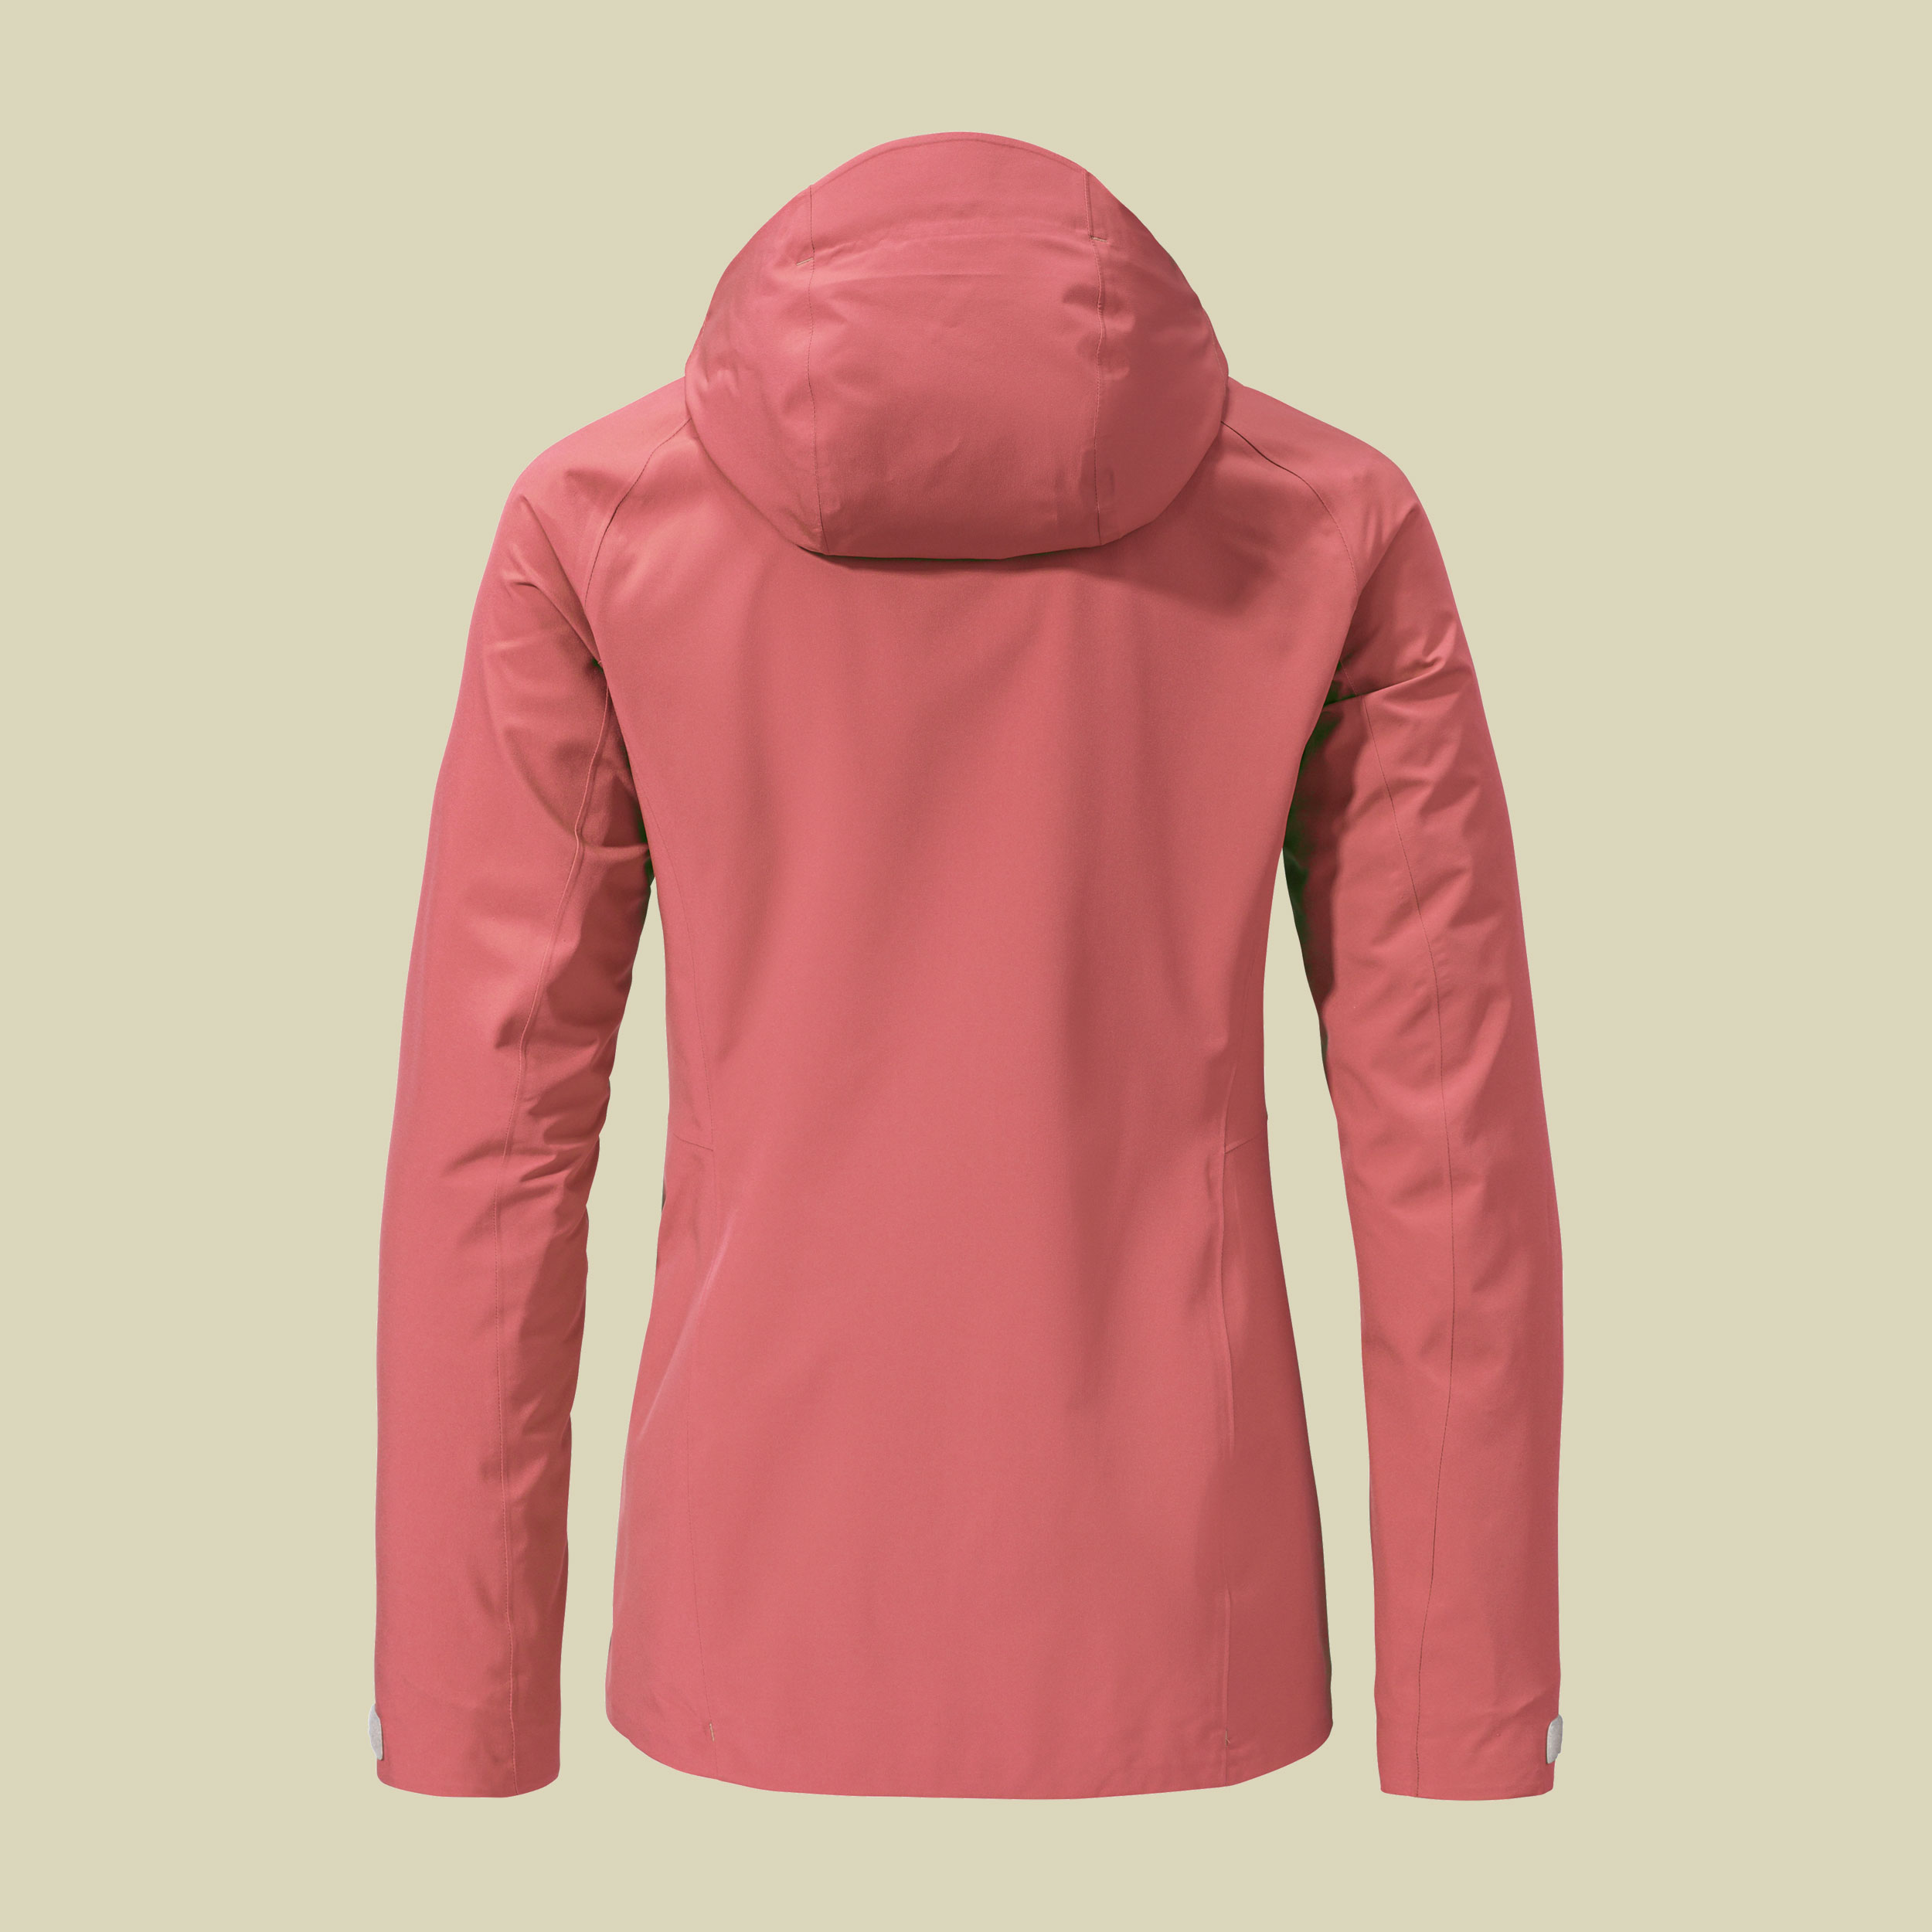 2L Jacket Ankelspitz L Women 40 pink - clasping rose